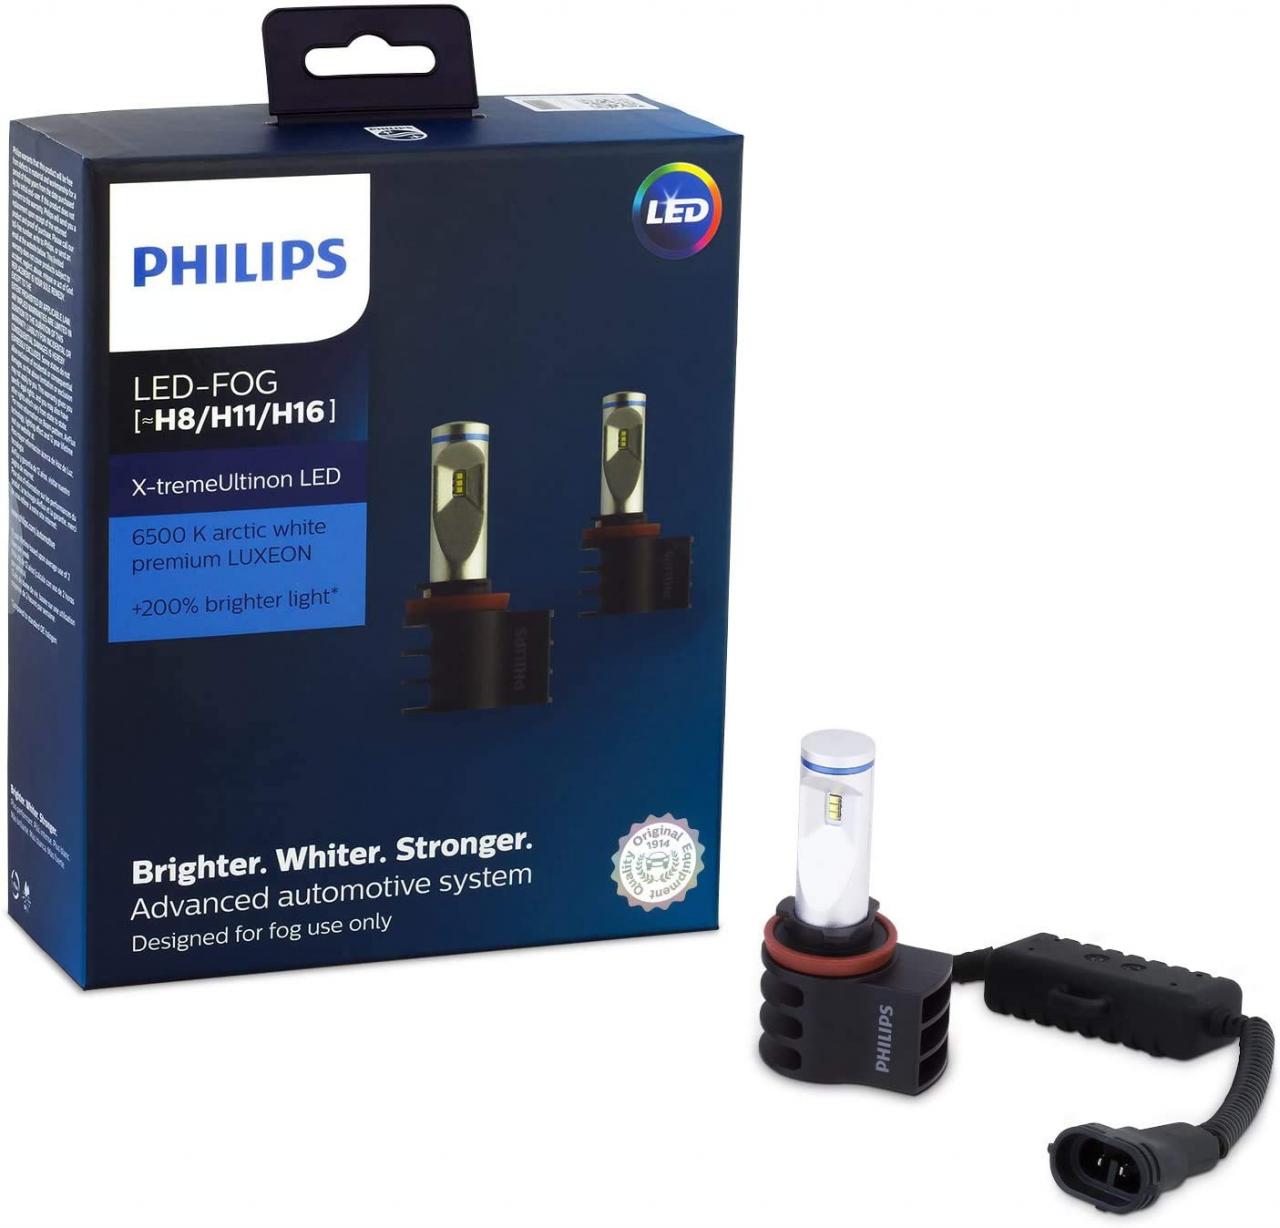 Philips 12834UNIX2 X-tremeVision LED Fog Light, Fits Fog H8, H11, H16, 2  Pack 2 Pack 12794UNIX2: Buy Online at Best Price in UAE - Amazon.ae